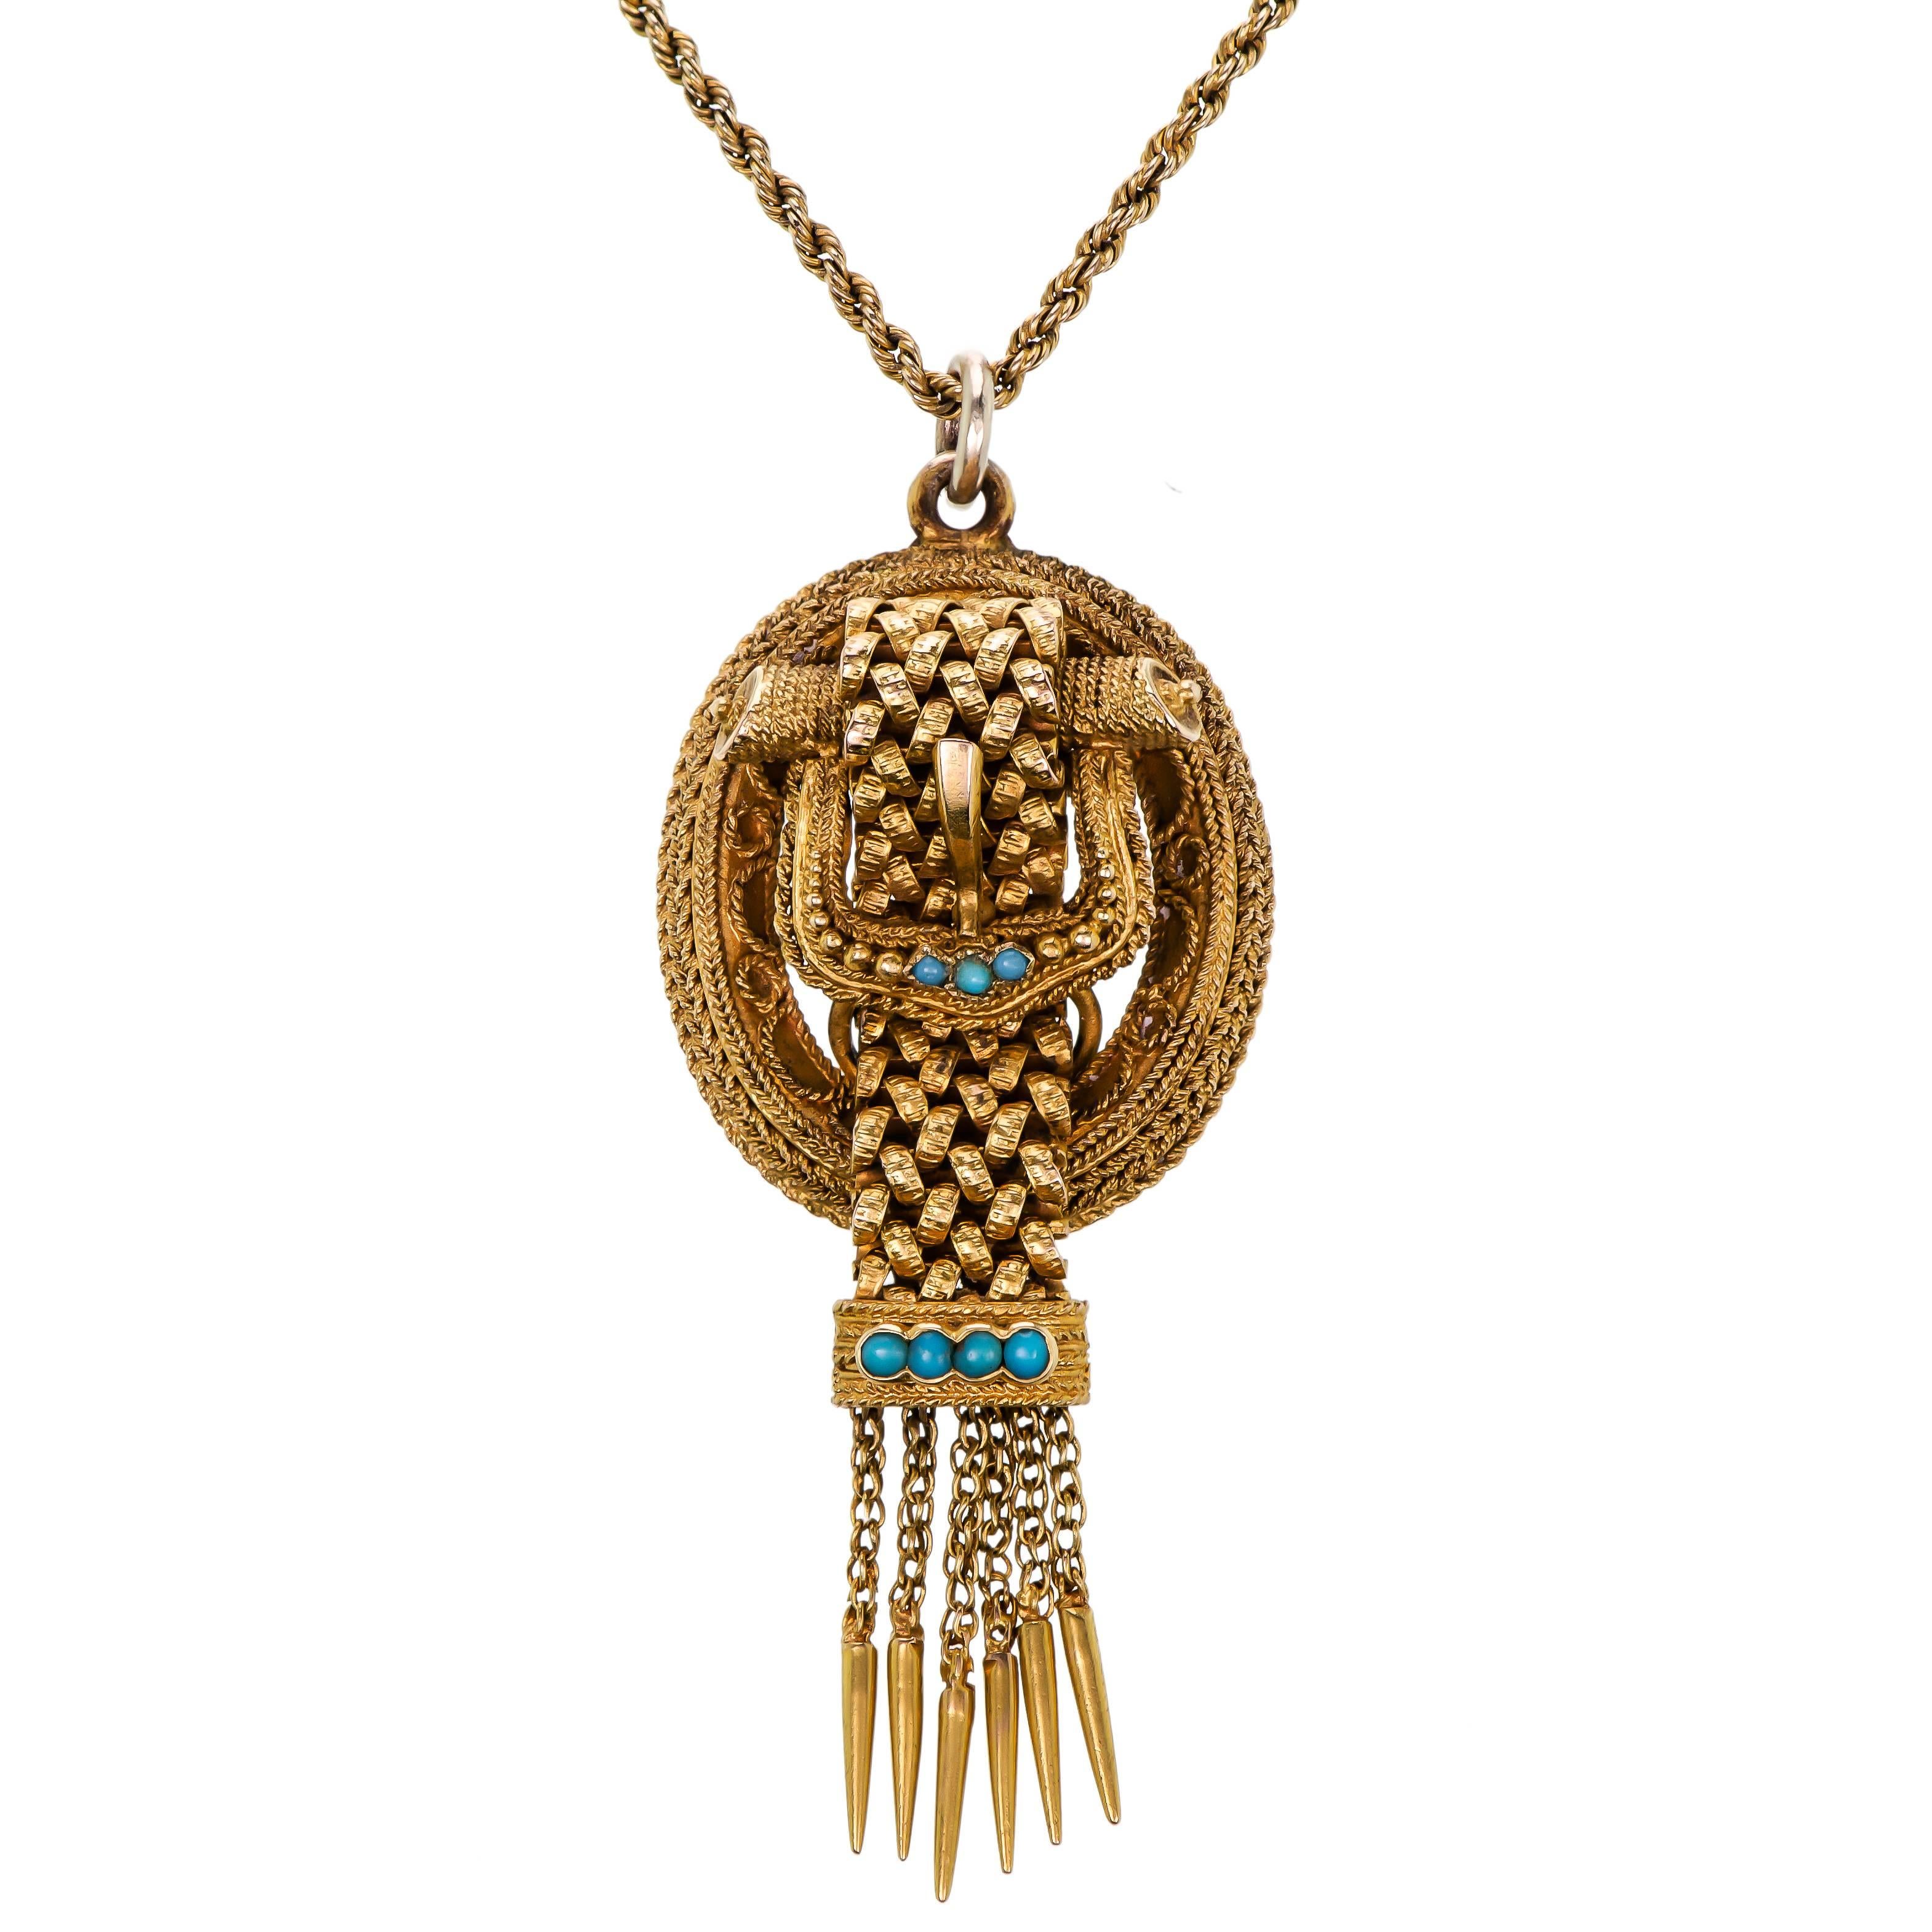 Victorian turquoise and yellow gold buckle motif pendant of a textured yellow gold buckle design set with seven (7) tiny round turquoise cabachons having a central gold mesh link which extends to a chain tassel suspended from an antique lower karat